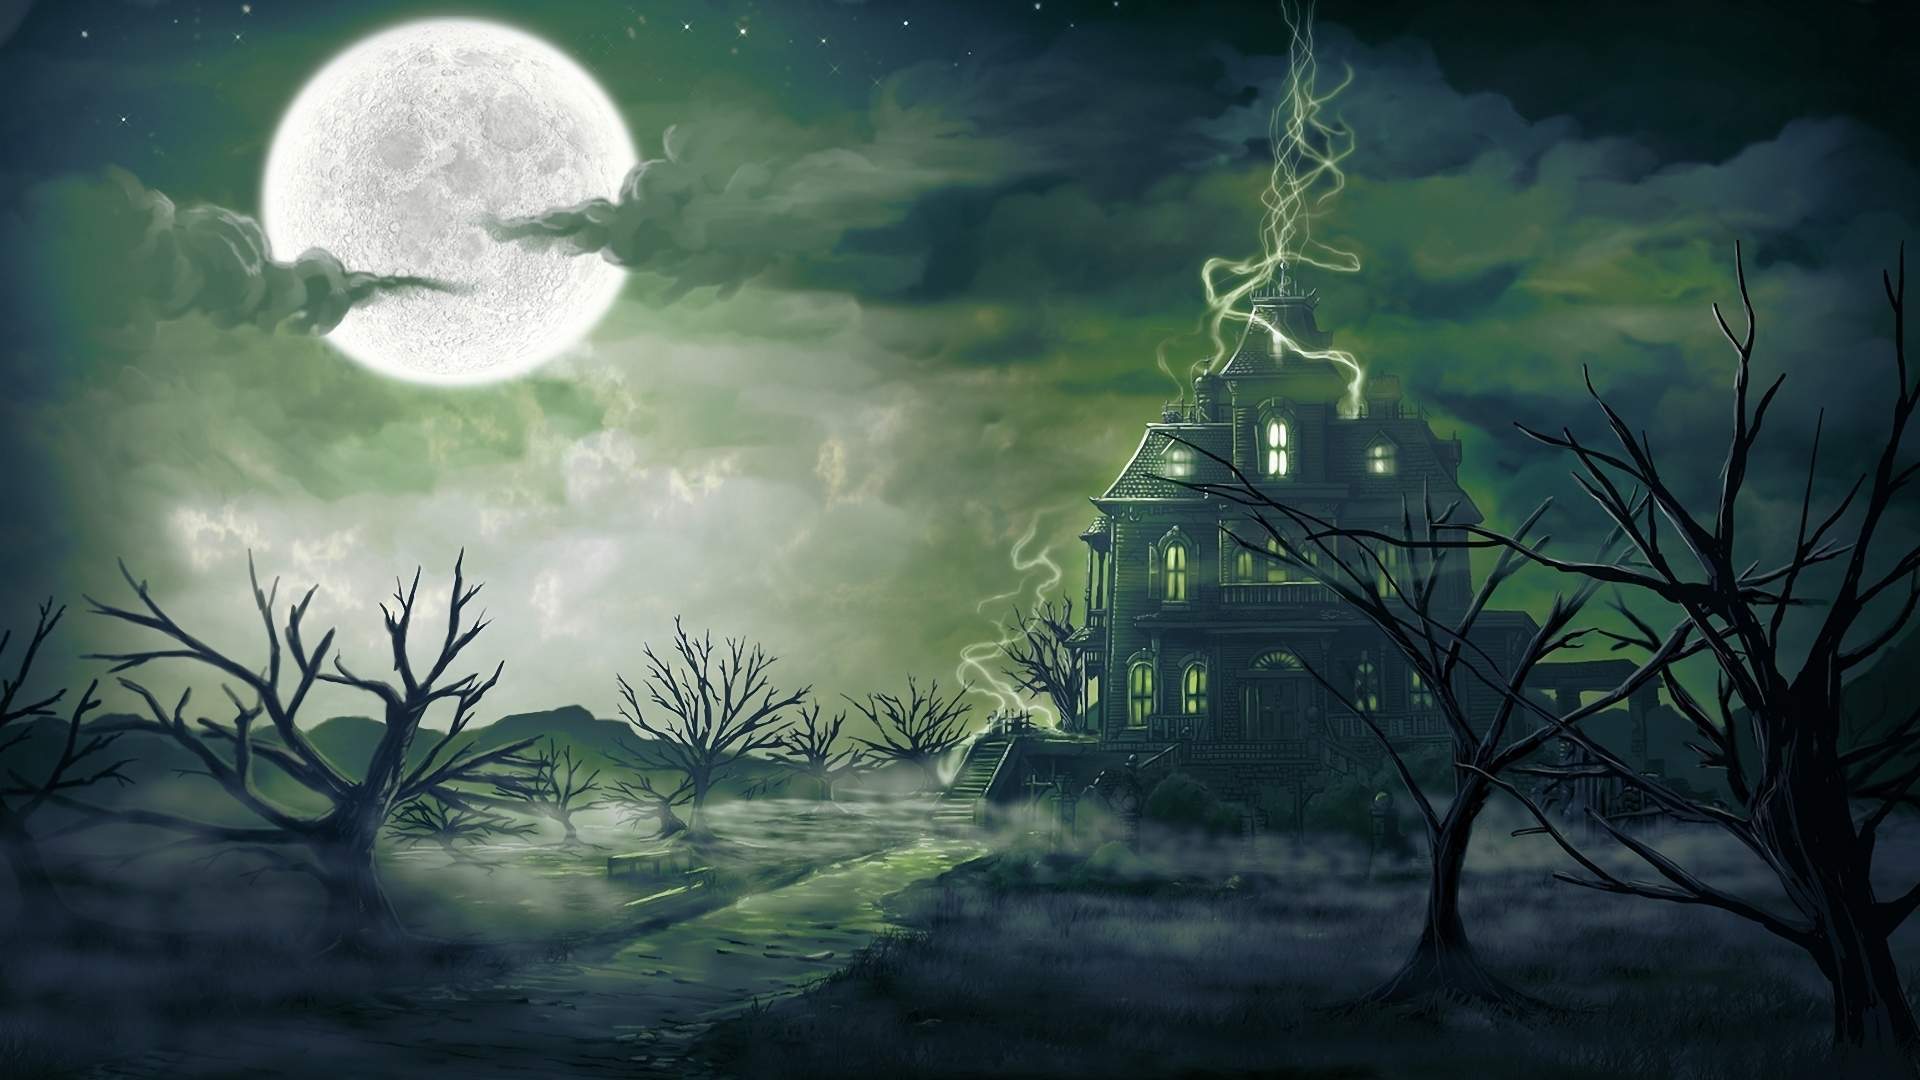 Haunted House Background Hd - 1920x1080 Wallpaper 